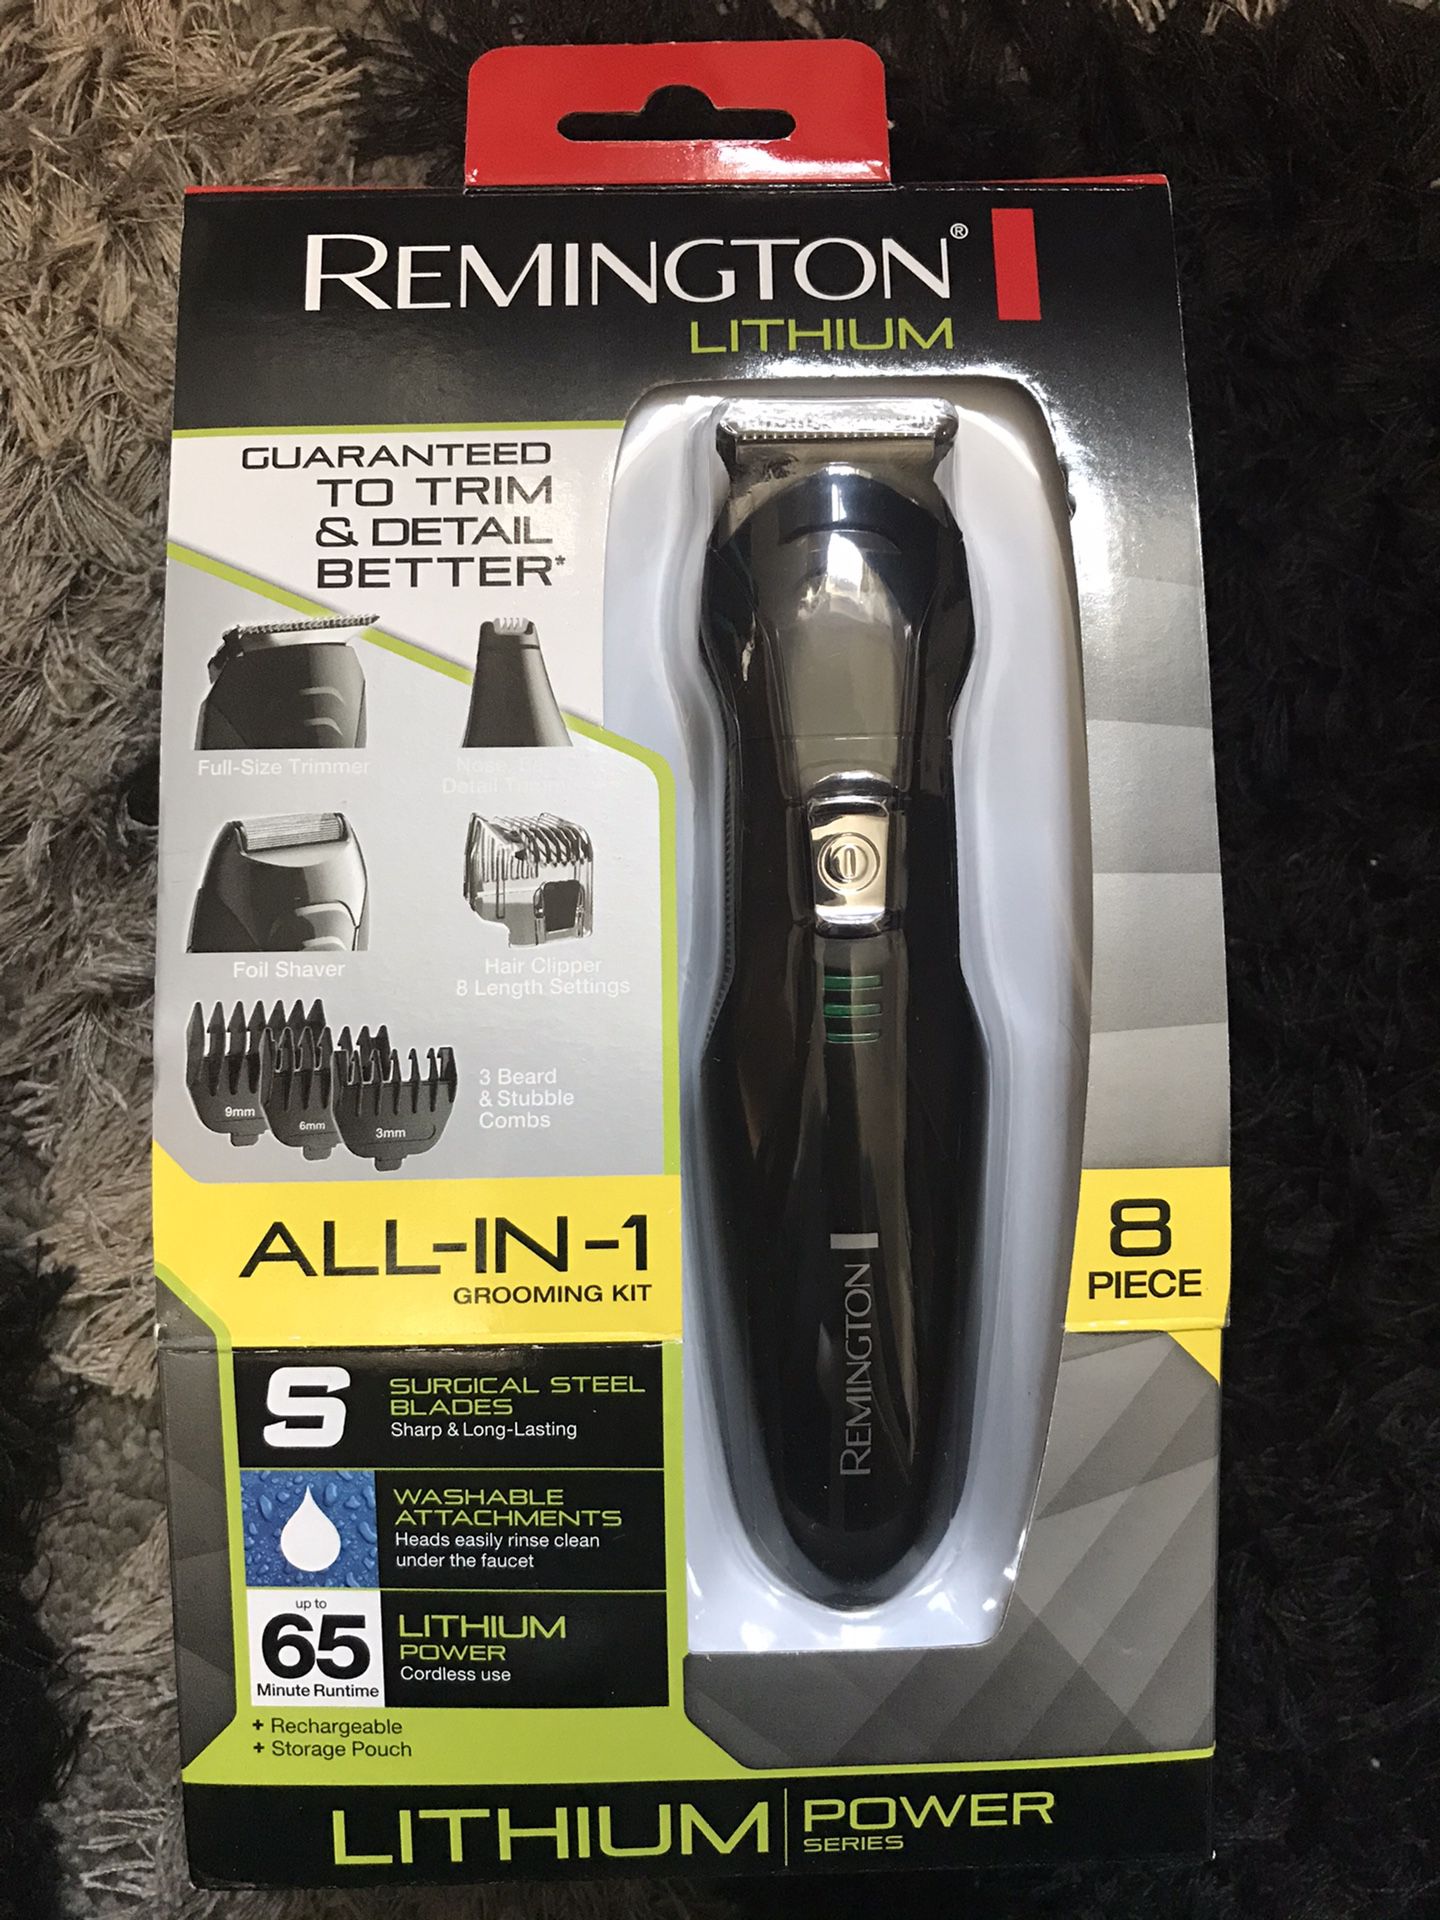 Remington PG6025 All-in-1 Lithium Powered Grooming Kit, Beard Trimmer